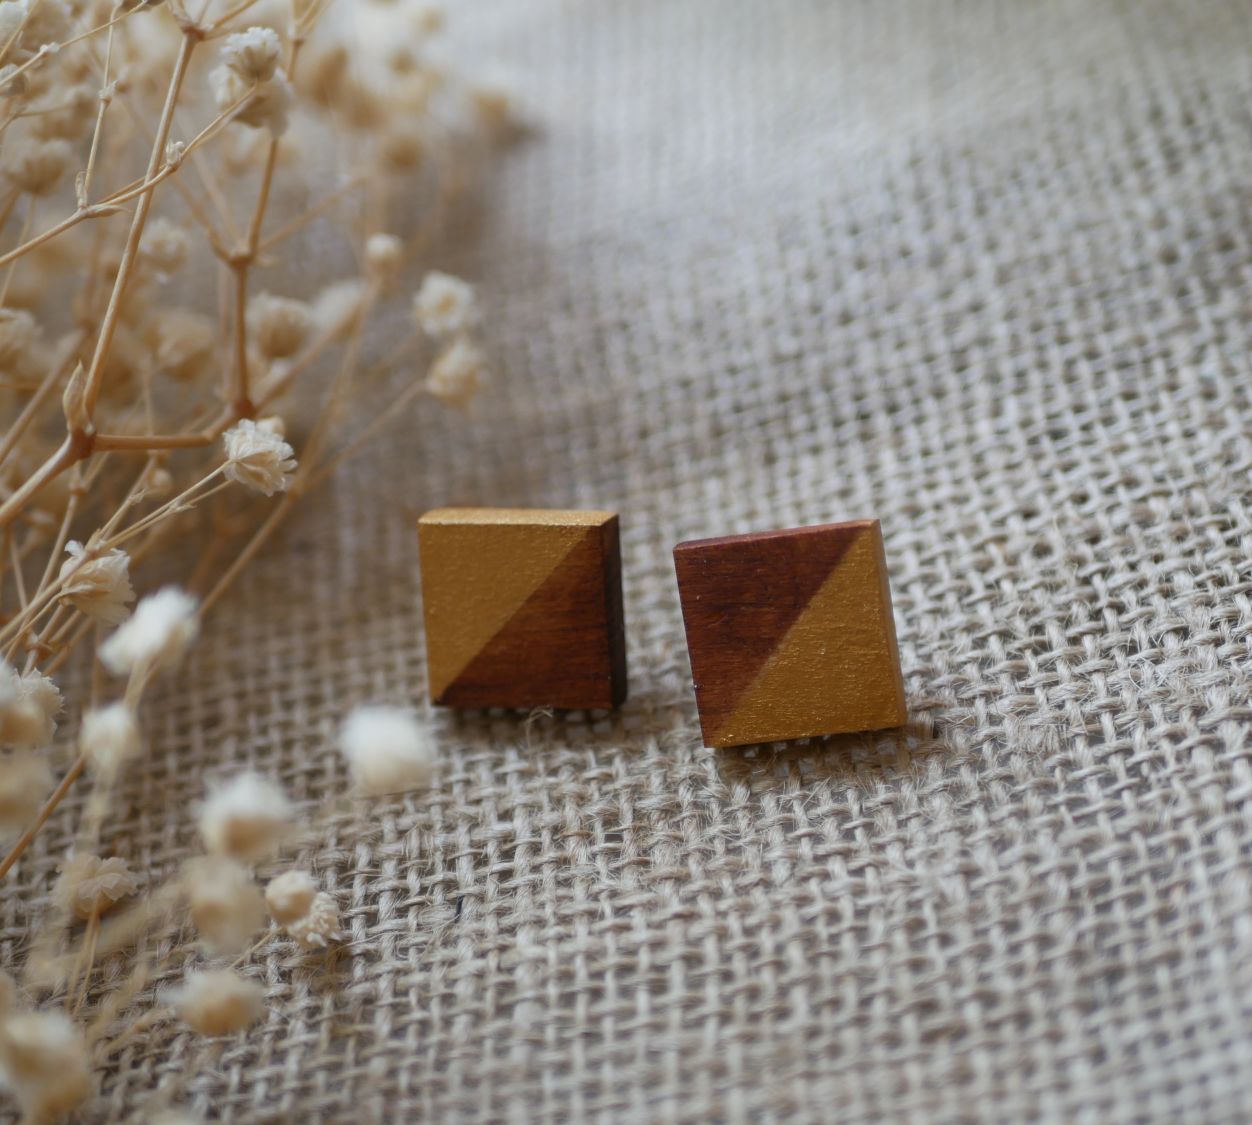 Round earrings in cherry wood painted in gold